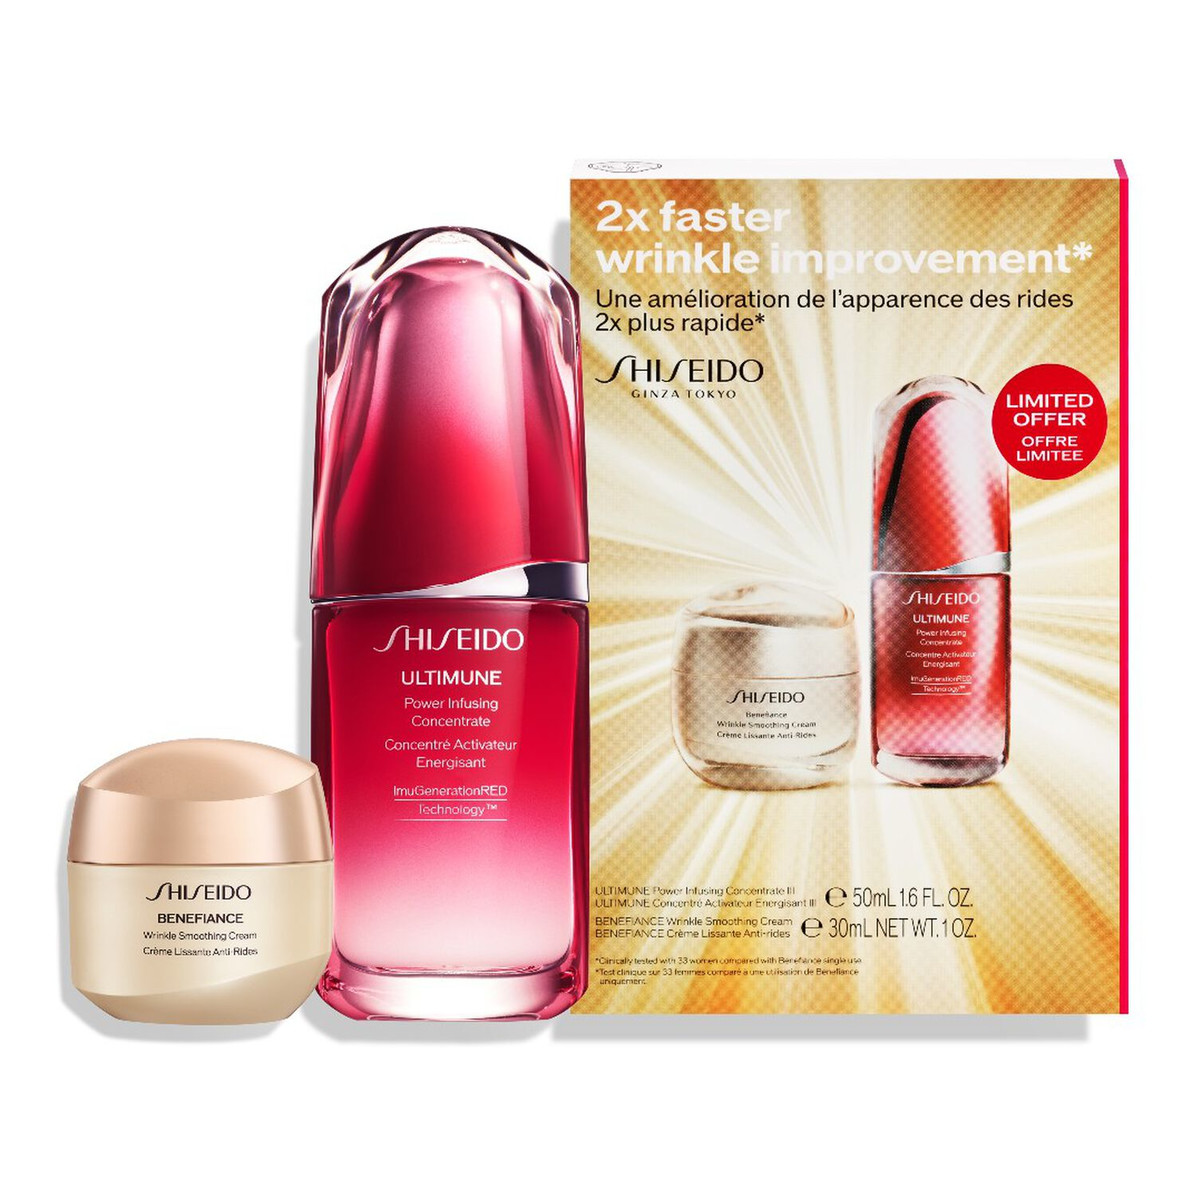 Shiseido Ultimune Zestaw Power Wrinkle Smoothing Set Benefiance Wrinkle Smoothing Cream + Ultimune Power Infusing Concentrate